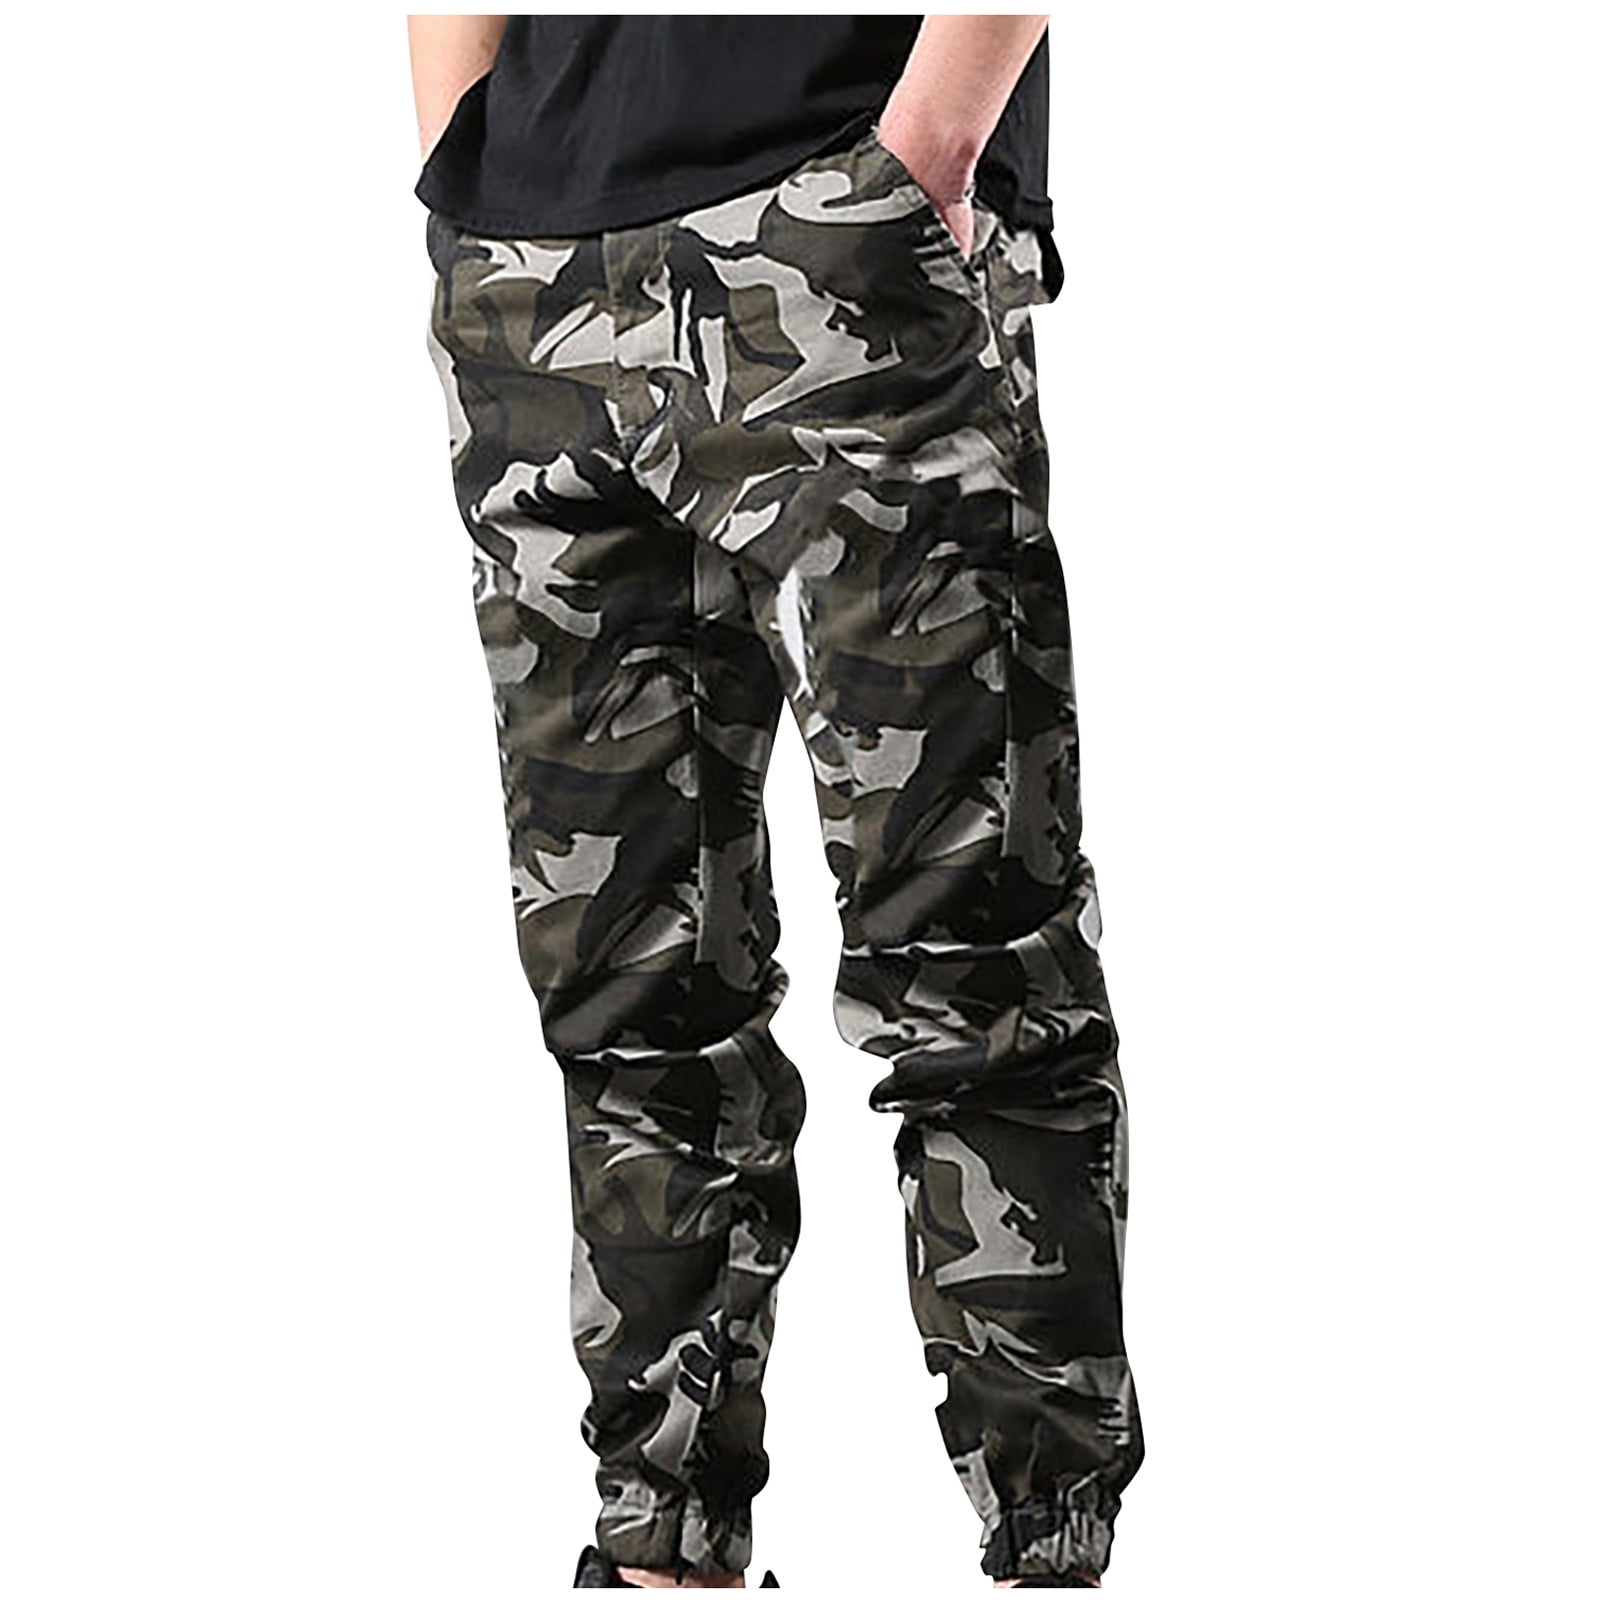 Men's Casual Cargo Pants Military Army Camo Pants Combat Work Pants with  Pockets Hiking Camping Fishing Running Athletic Active Jogger Pant  Clearance